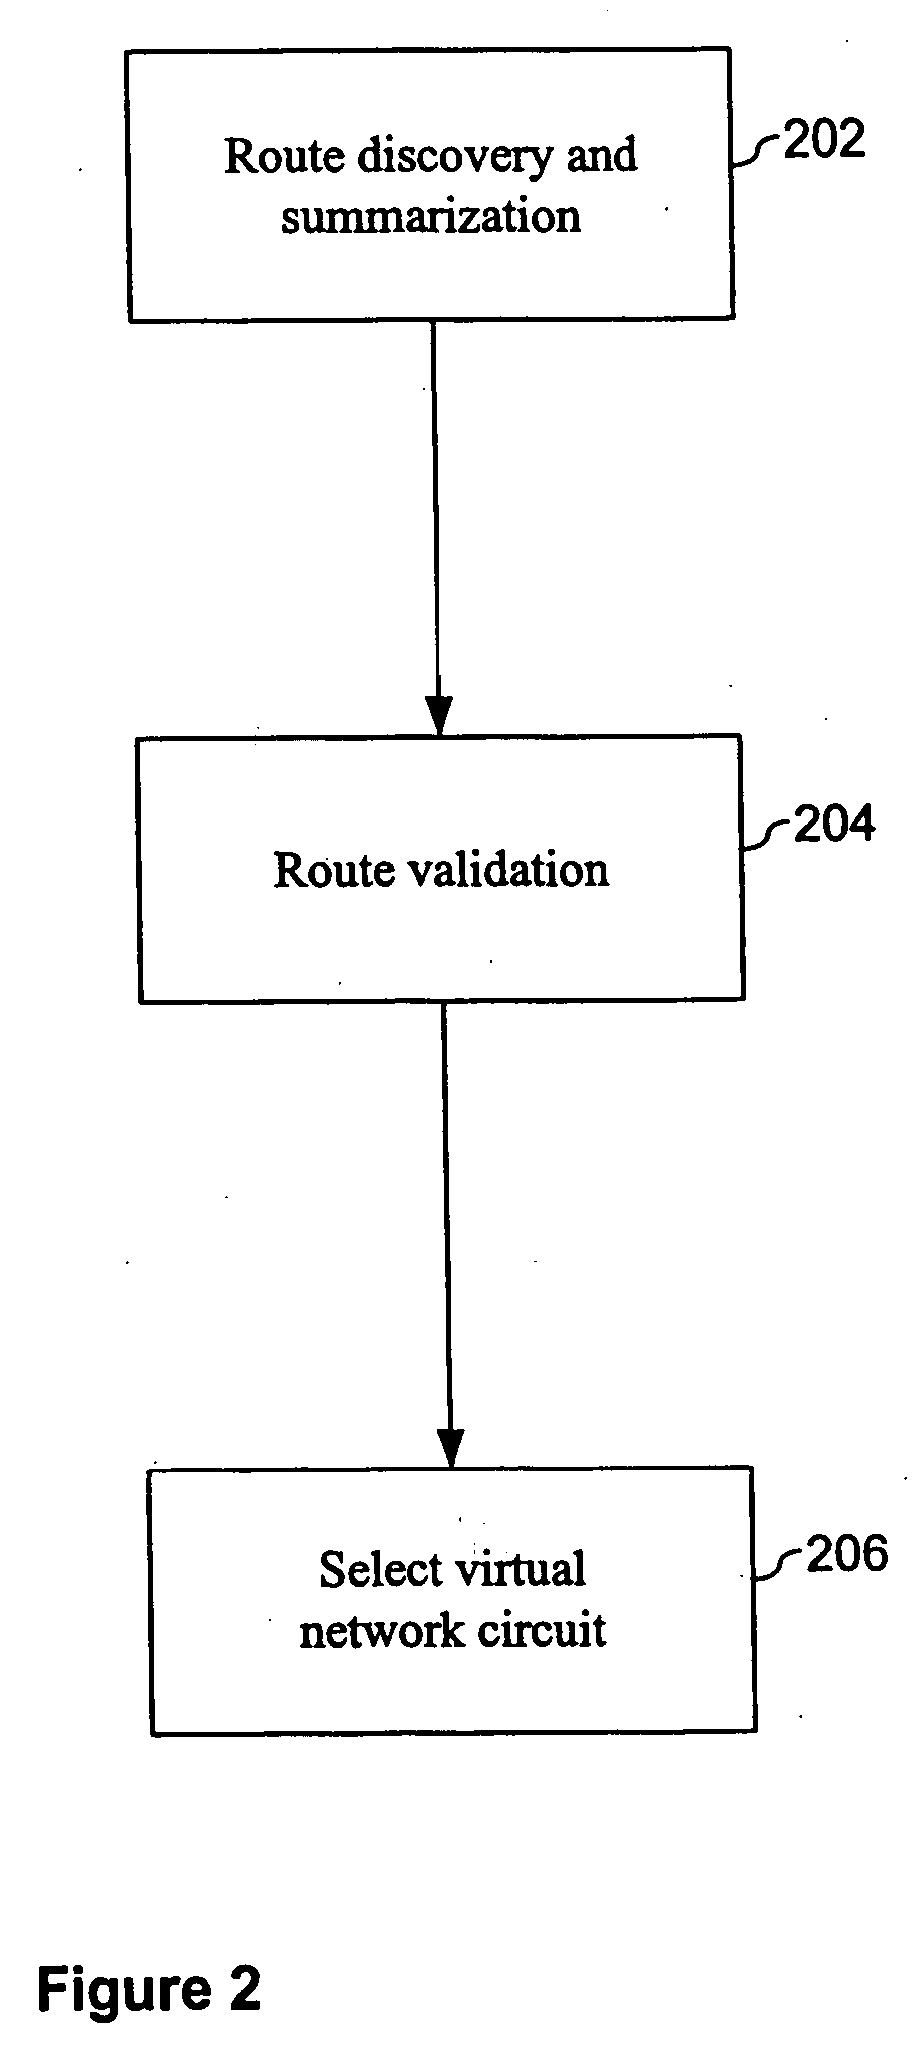 Efficient discovery and verification of paths through a meshed overlay network